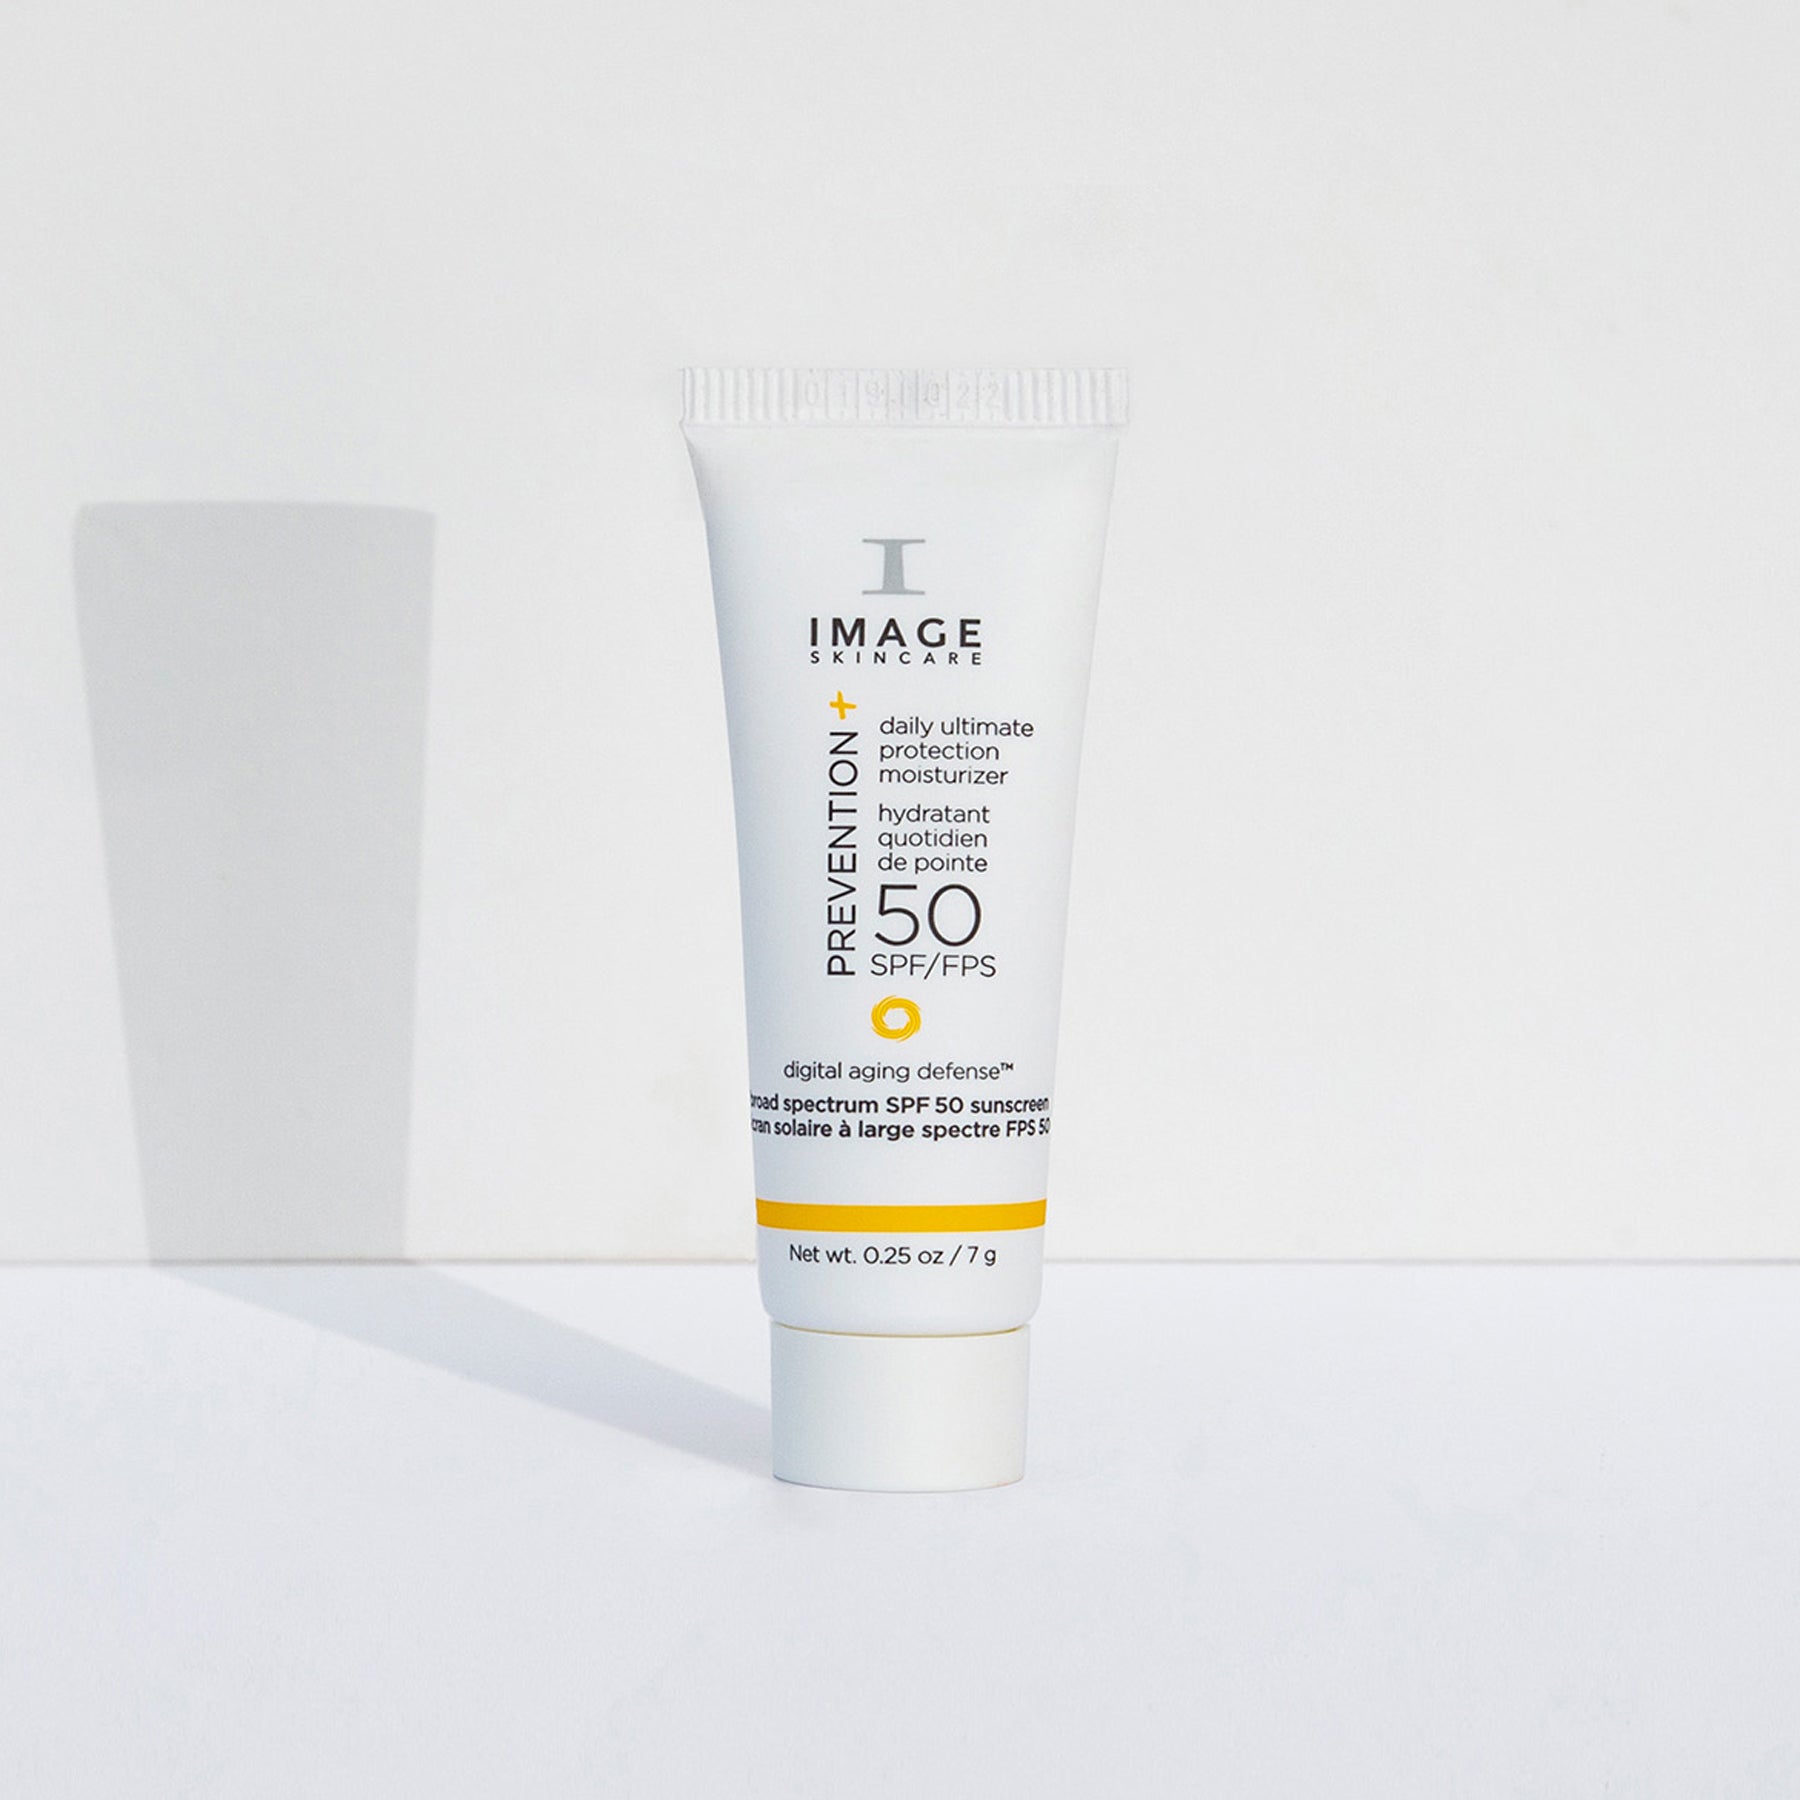 » PREVENTION+ daily ultimate protection moisturizer SPF50 sample (50% off)